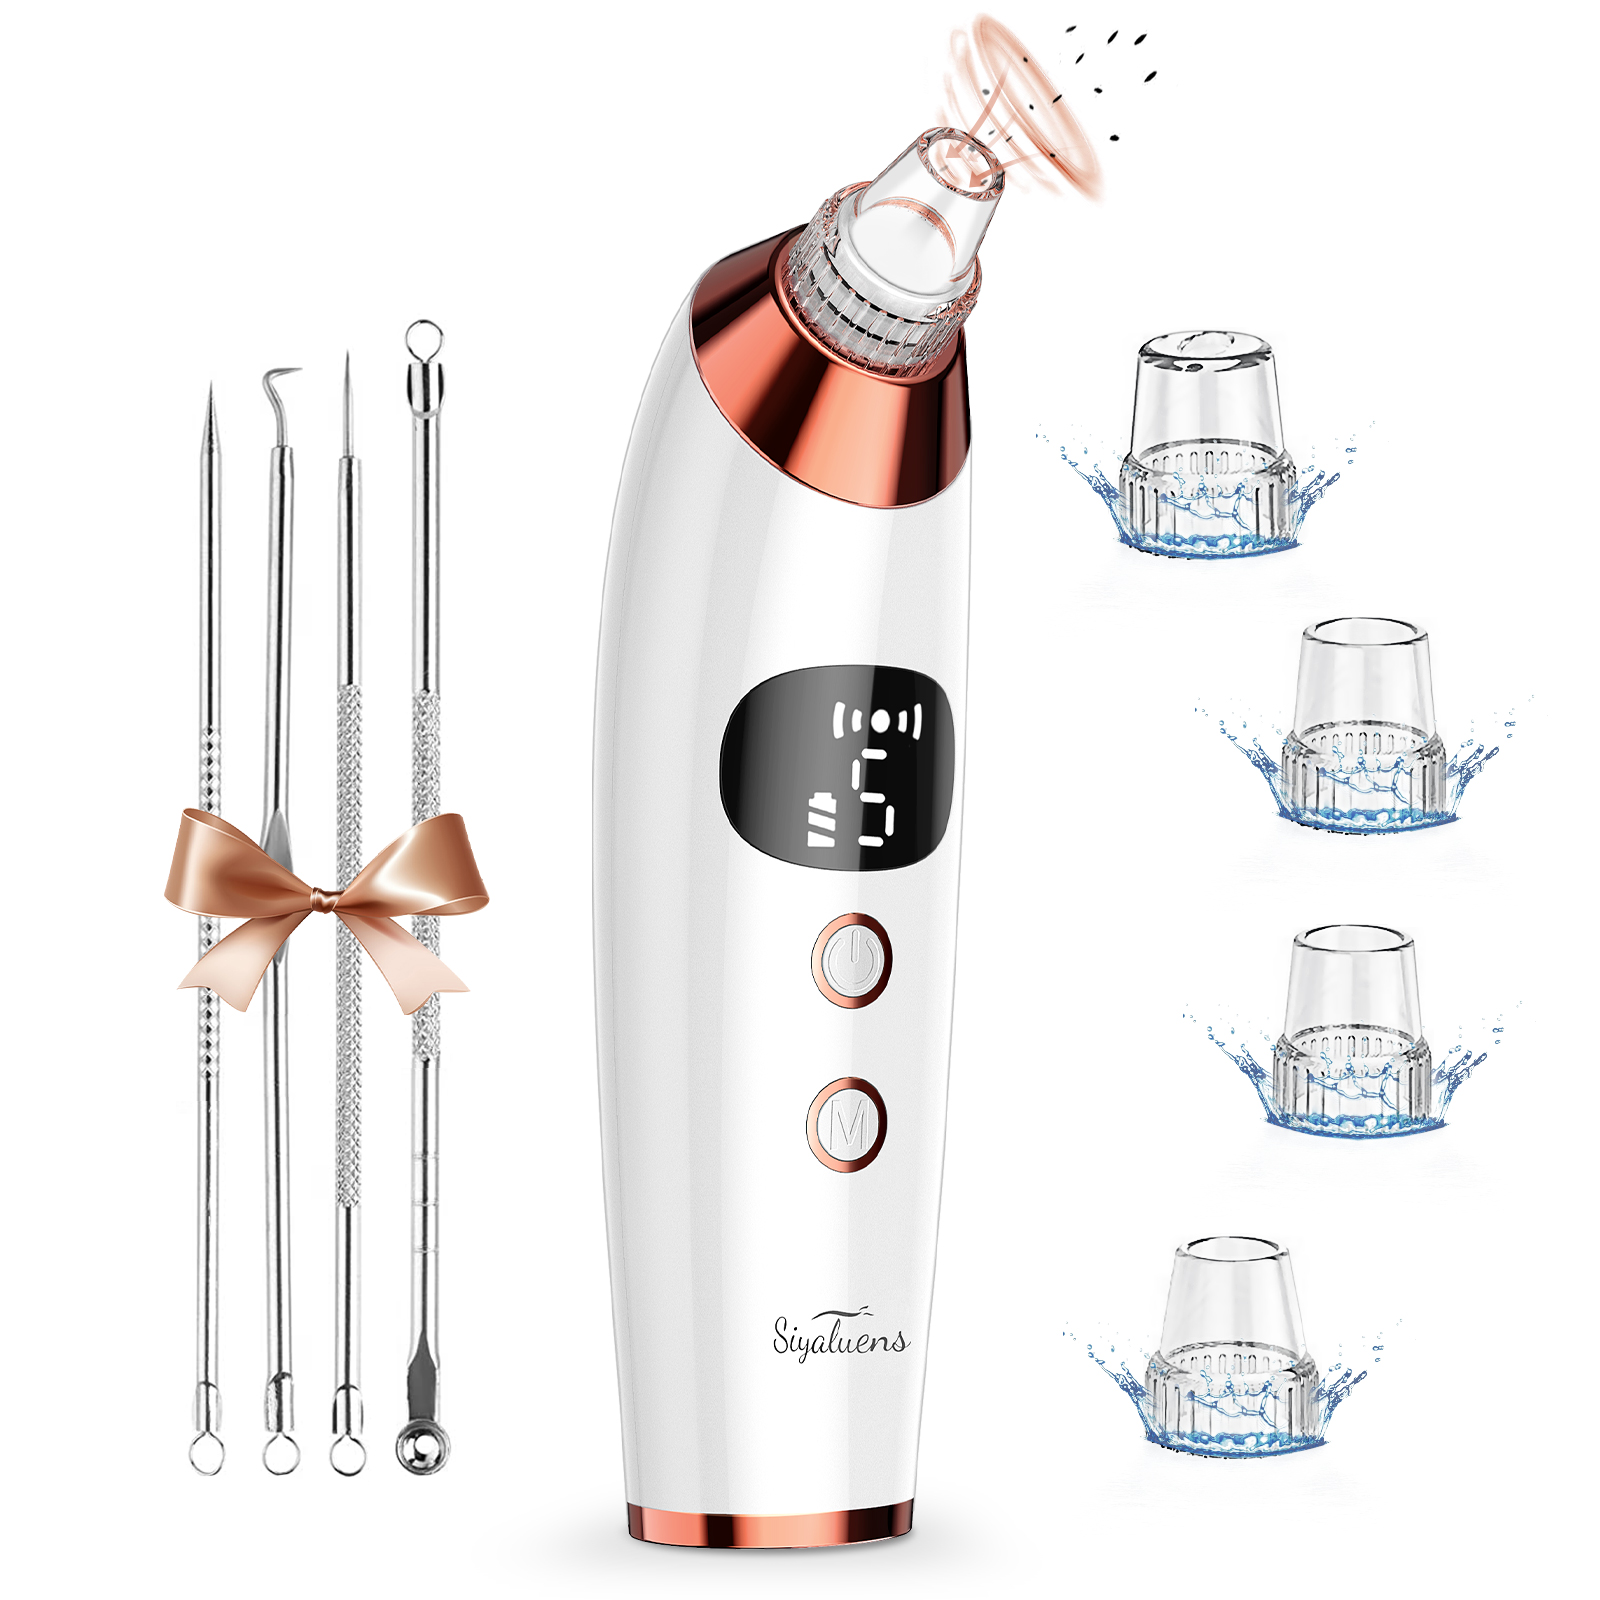 Blackhead Remover Vacuum Pore Cleaner,Siyaluens Facial Pore Acne Comedone Whitehead Extractor with 5 Suction Power & 4 Probes,Hot Compress,3 Beauty Lamps,Electric USB Rechargeable Black Head Suction